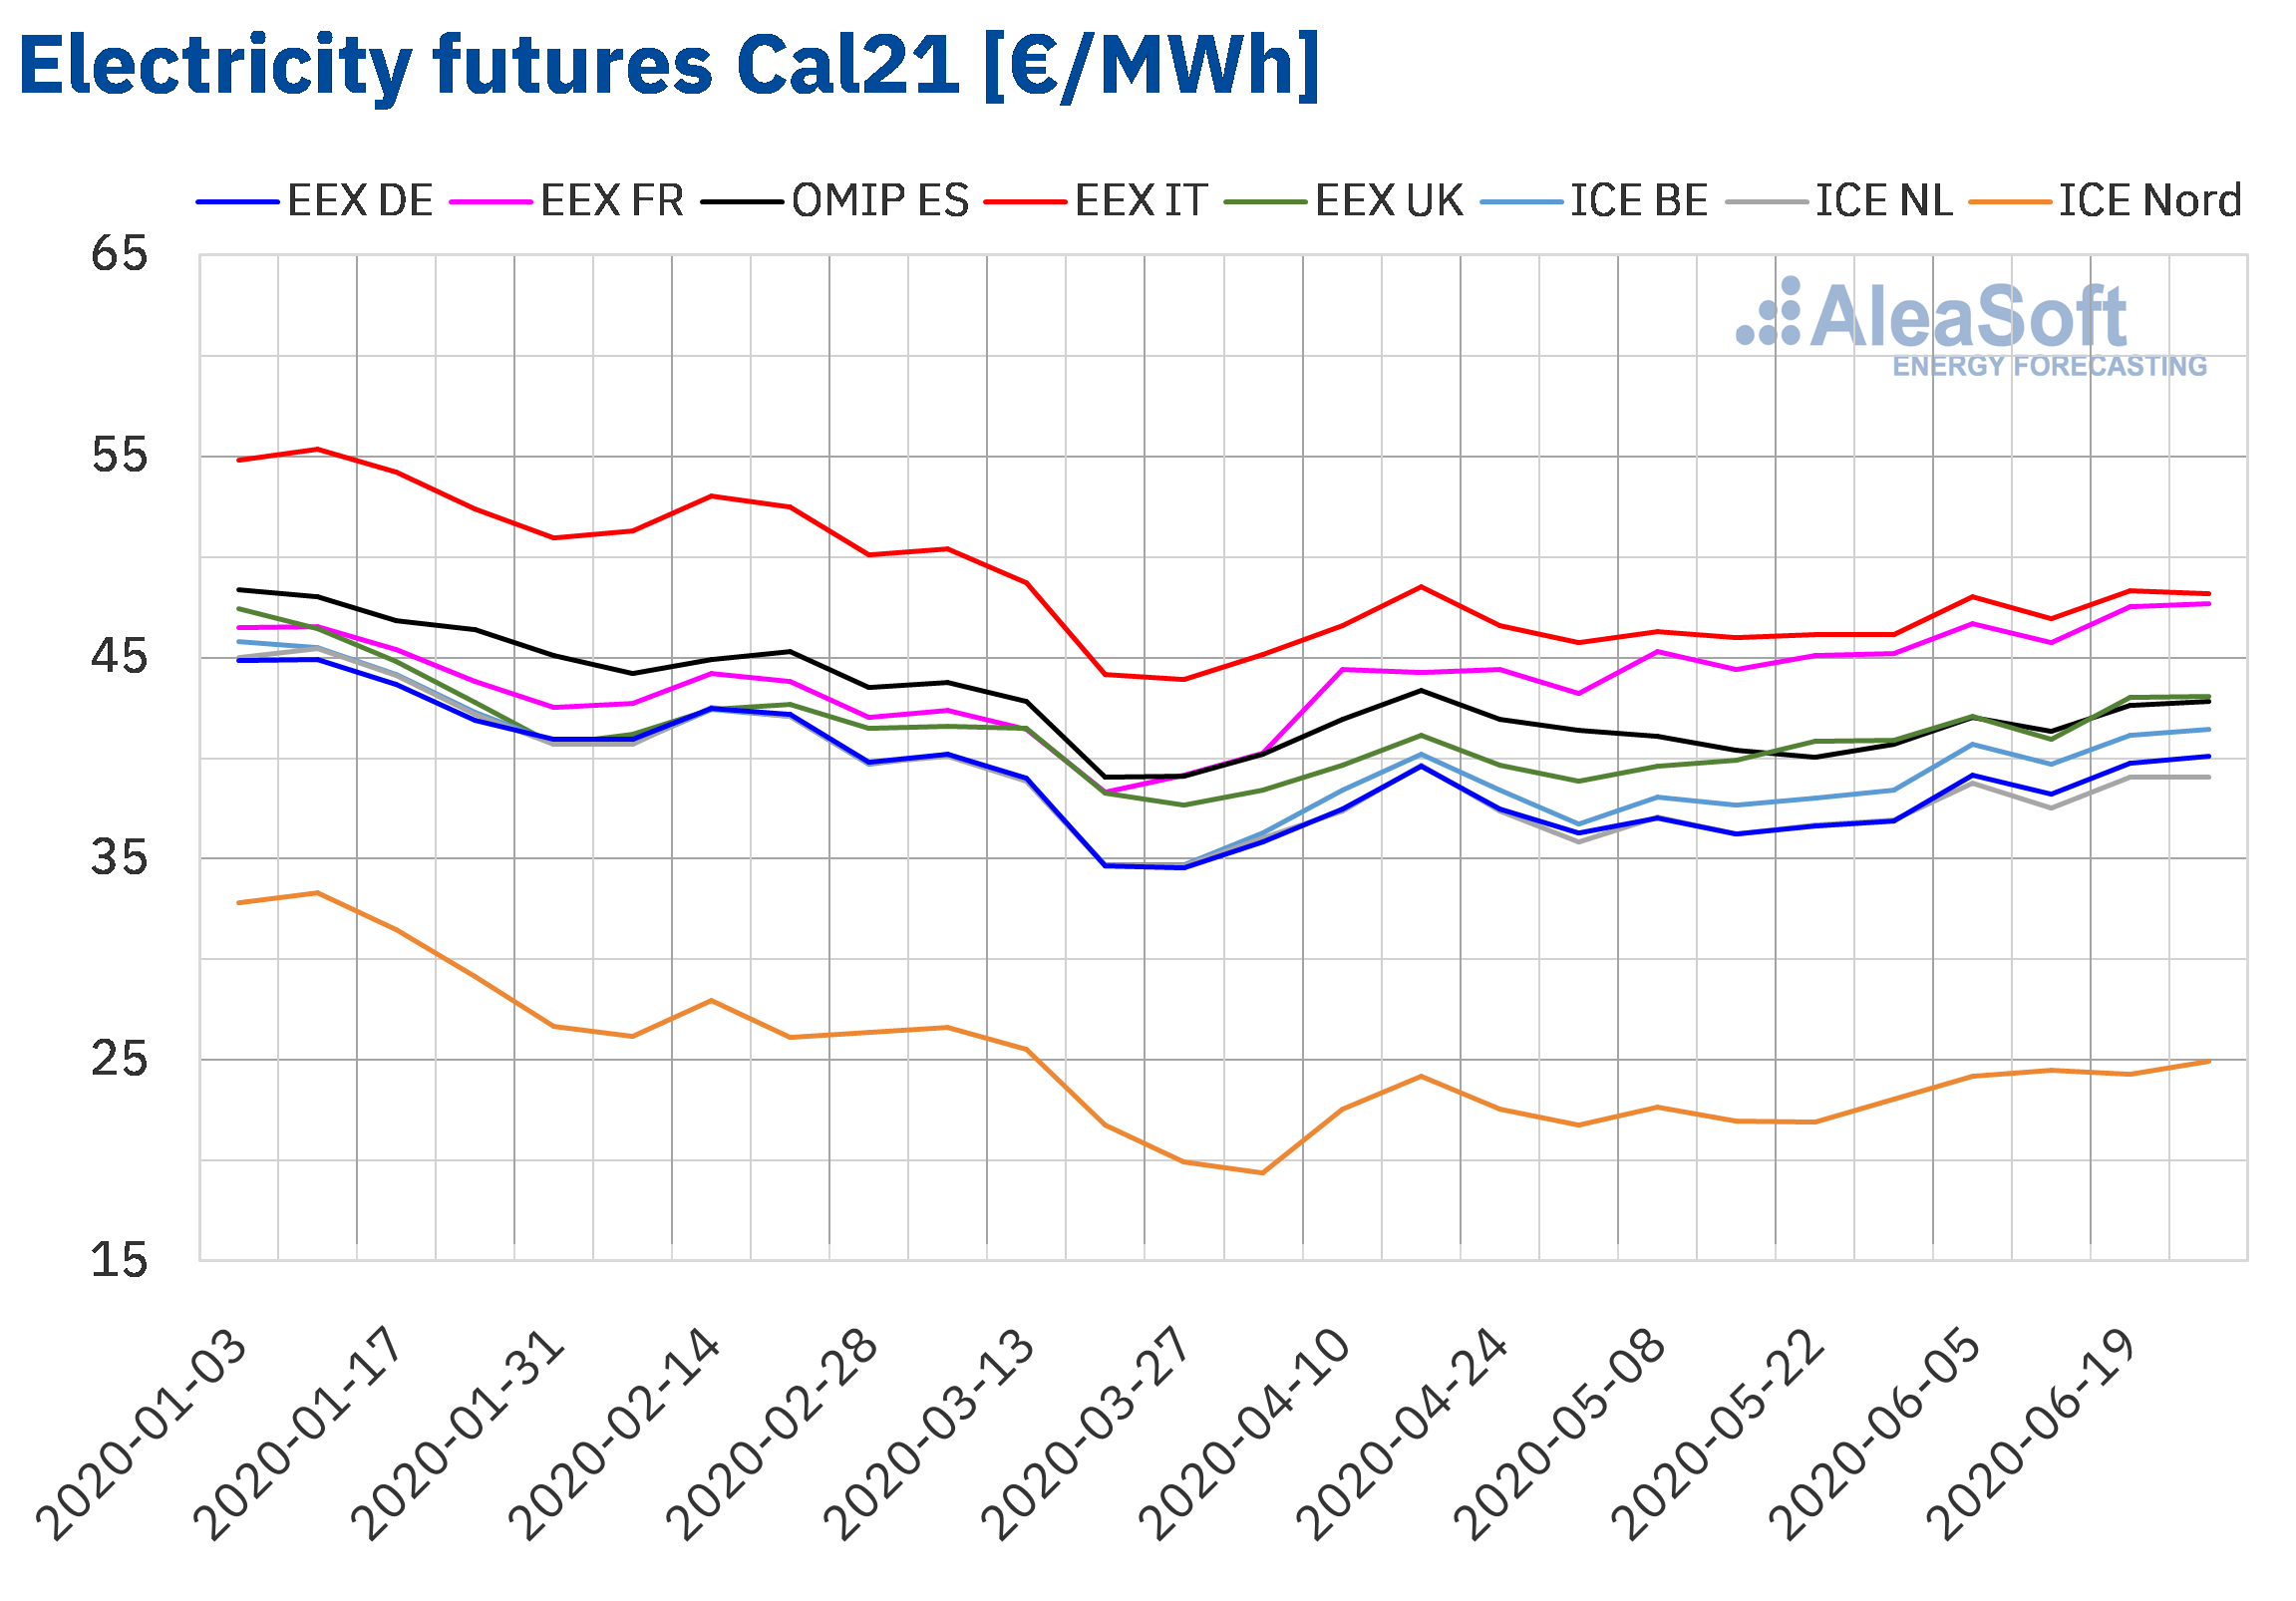 AleaSoft - Electricity futures prices cal 21 first semester 2020